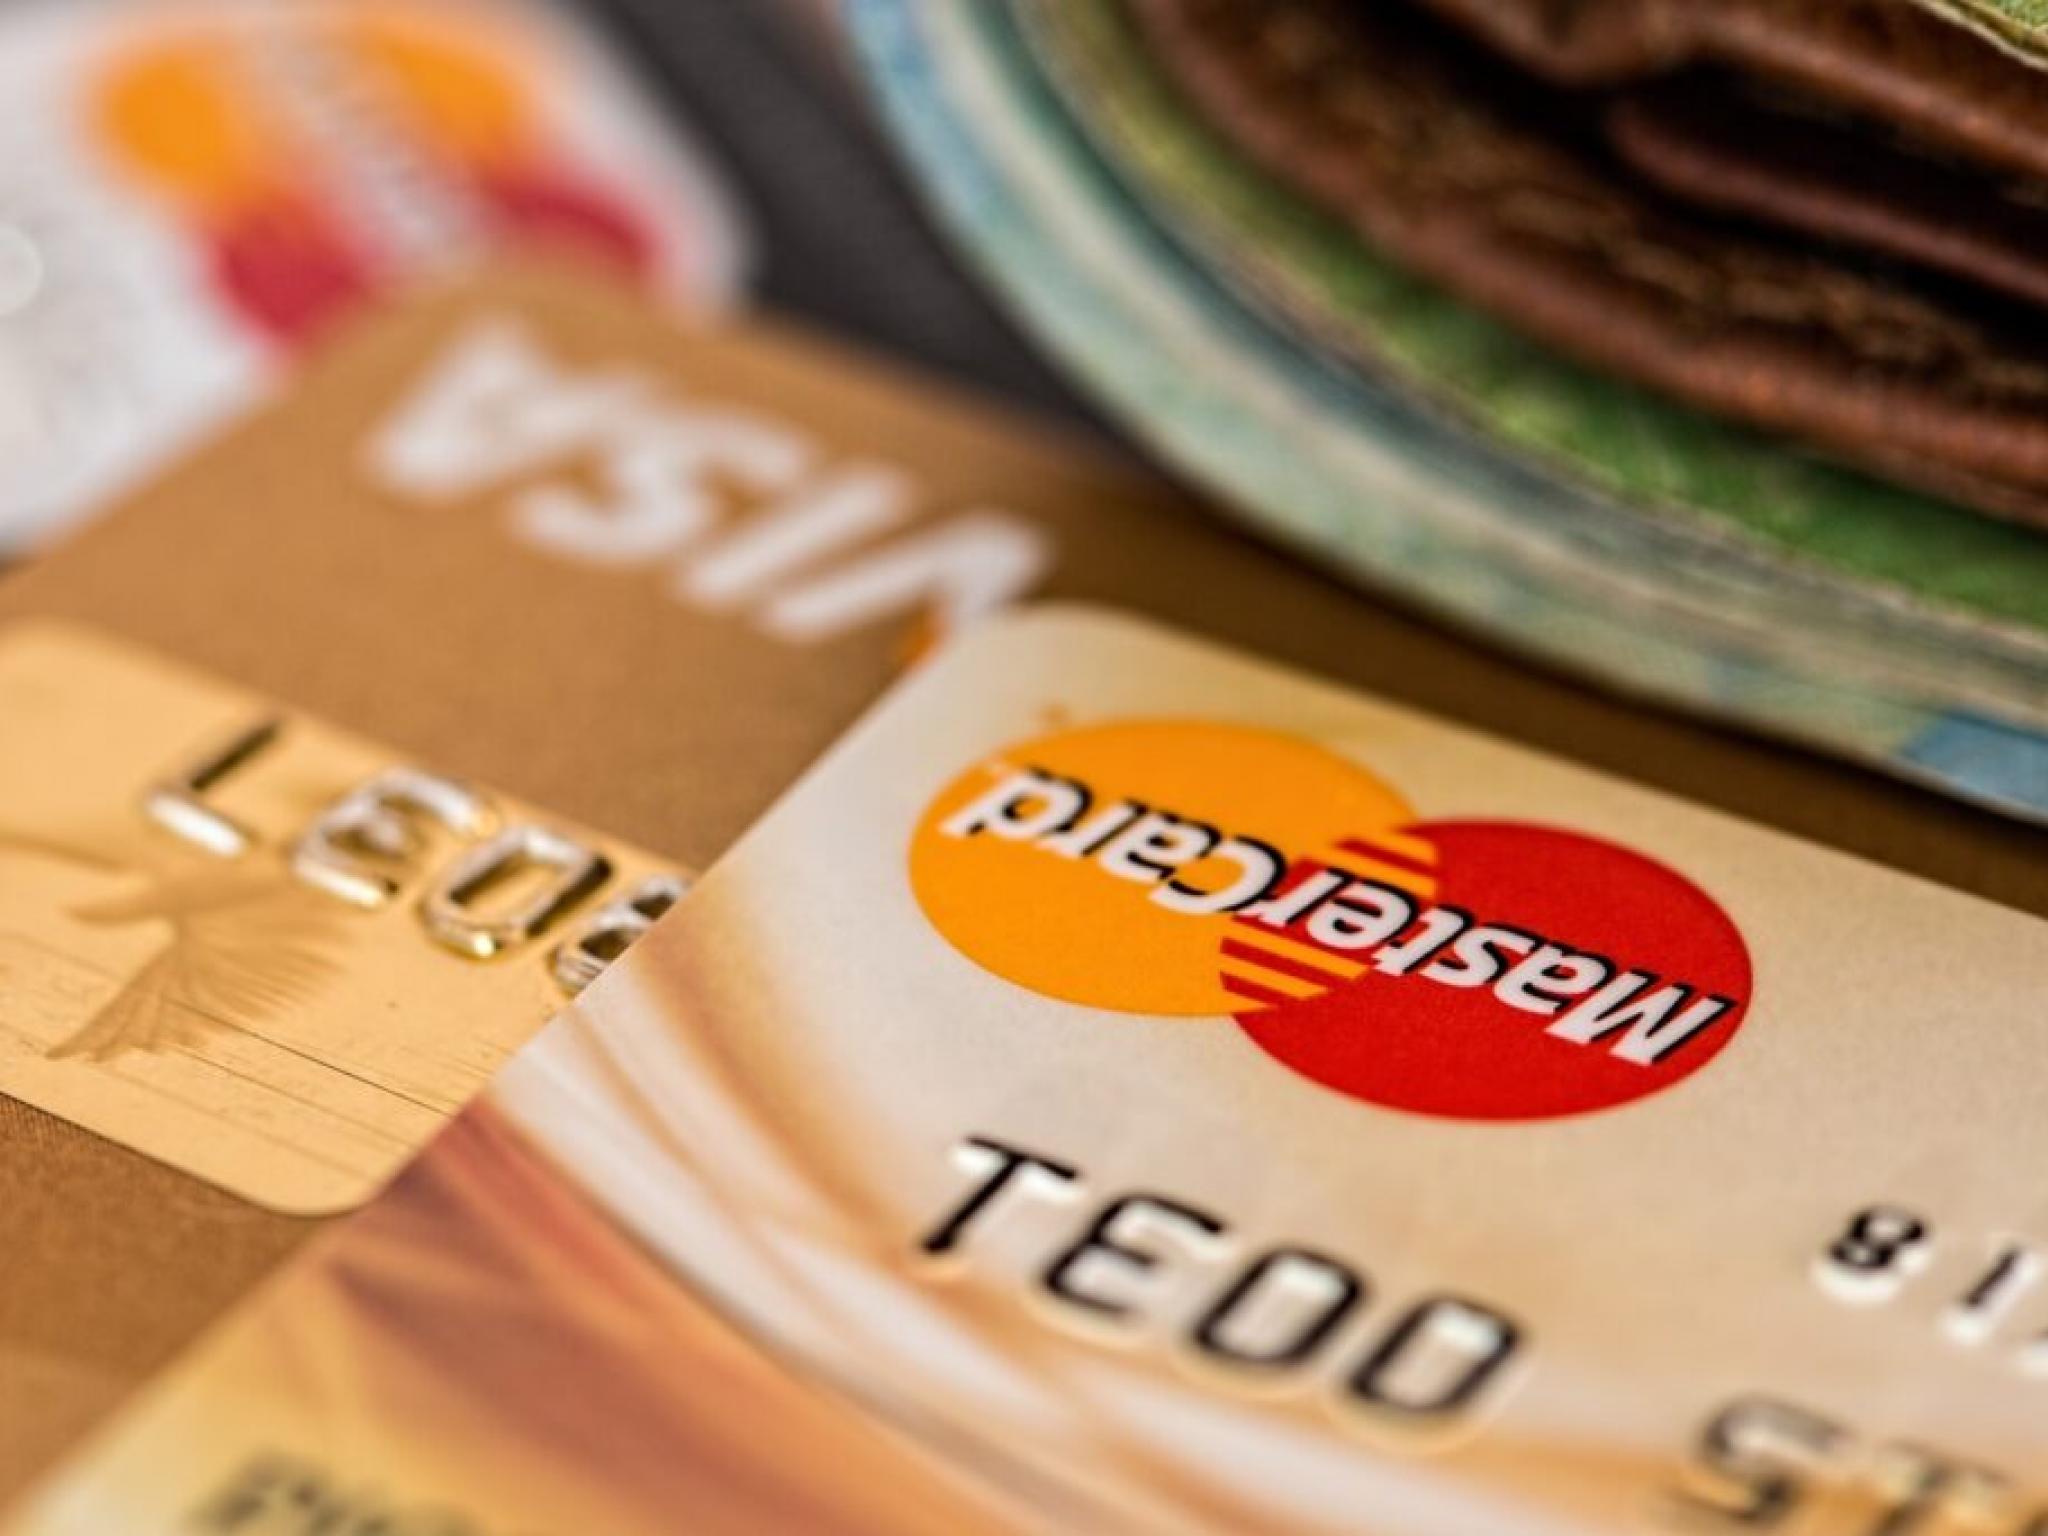  mastercard-set-to-increase-credit-card-fees-adding-millions-in-costs-for-retailers-after-visa-settlement 